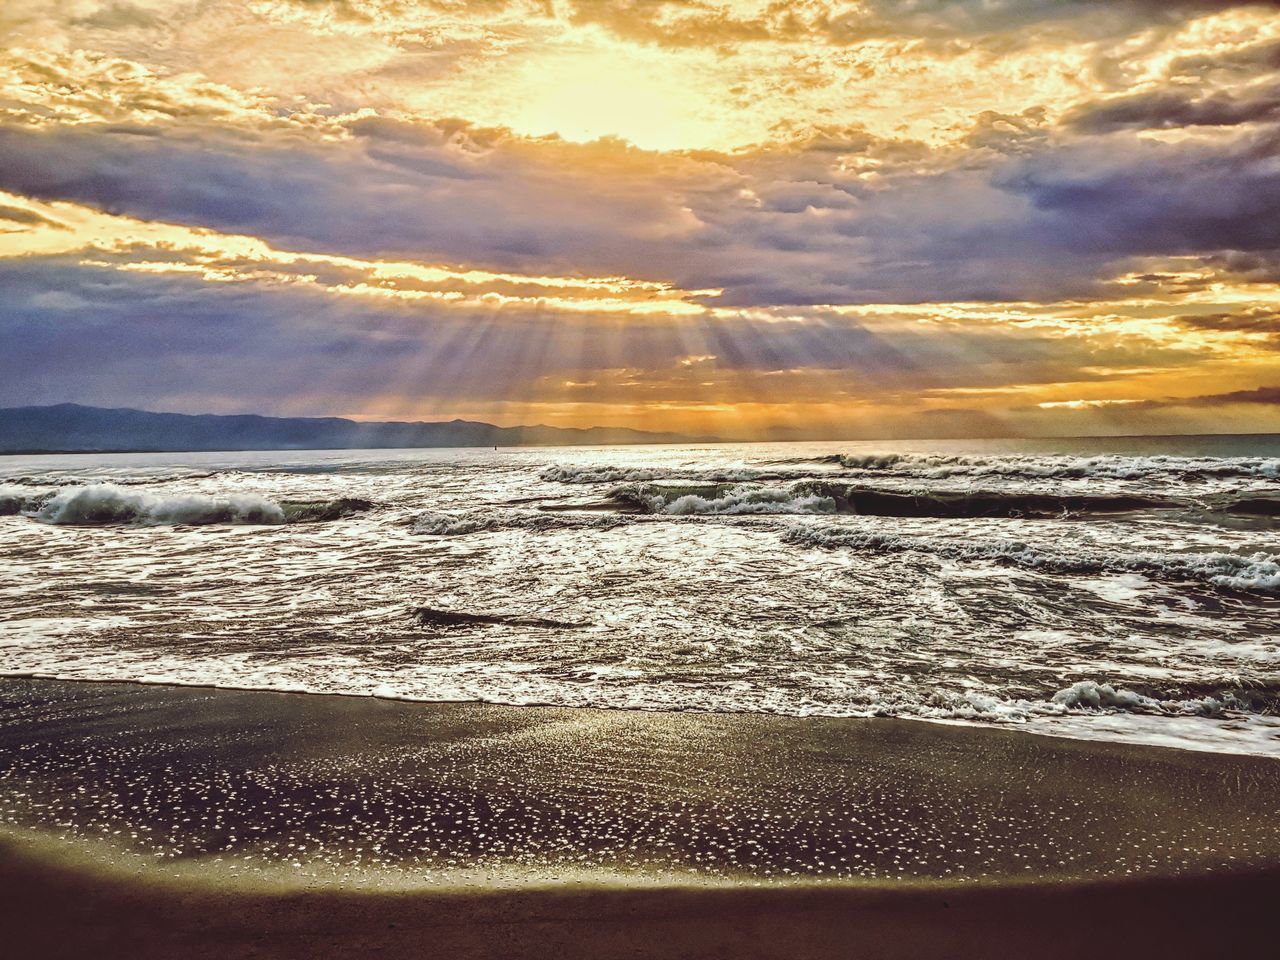 sky, sea, water, sunset, beauty in nature, cloud, land, scenics - nature, ocean, beach, nature, sunlight, shore, wave, horizon, tranquility, reflection, sand, coast, tranquil scene, no people, environment, dawn, wind wave, sun, dramatic sky, idyllic, outdoors, motion, water sports, landscape, sports, body of water, evening, travel, travel destinations, horizon over water, sunbeam